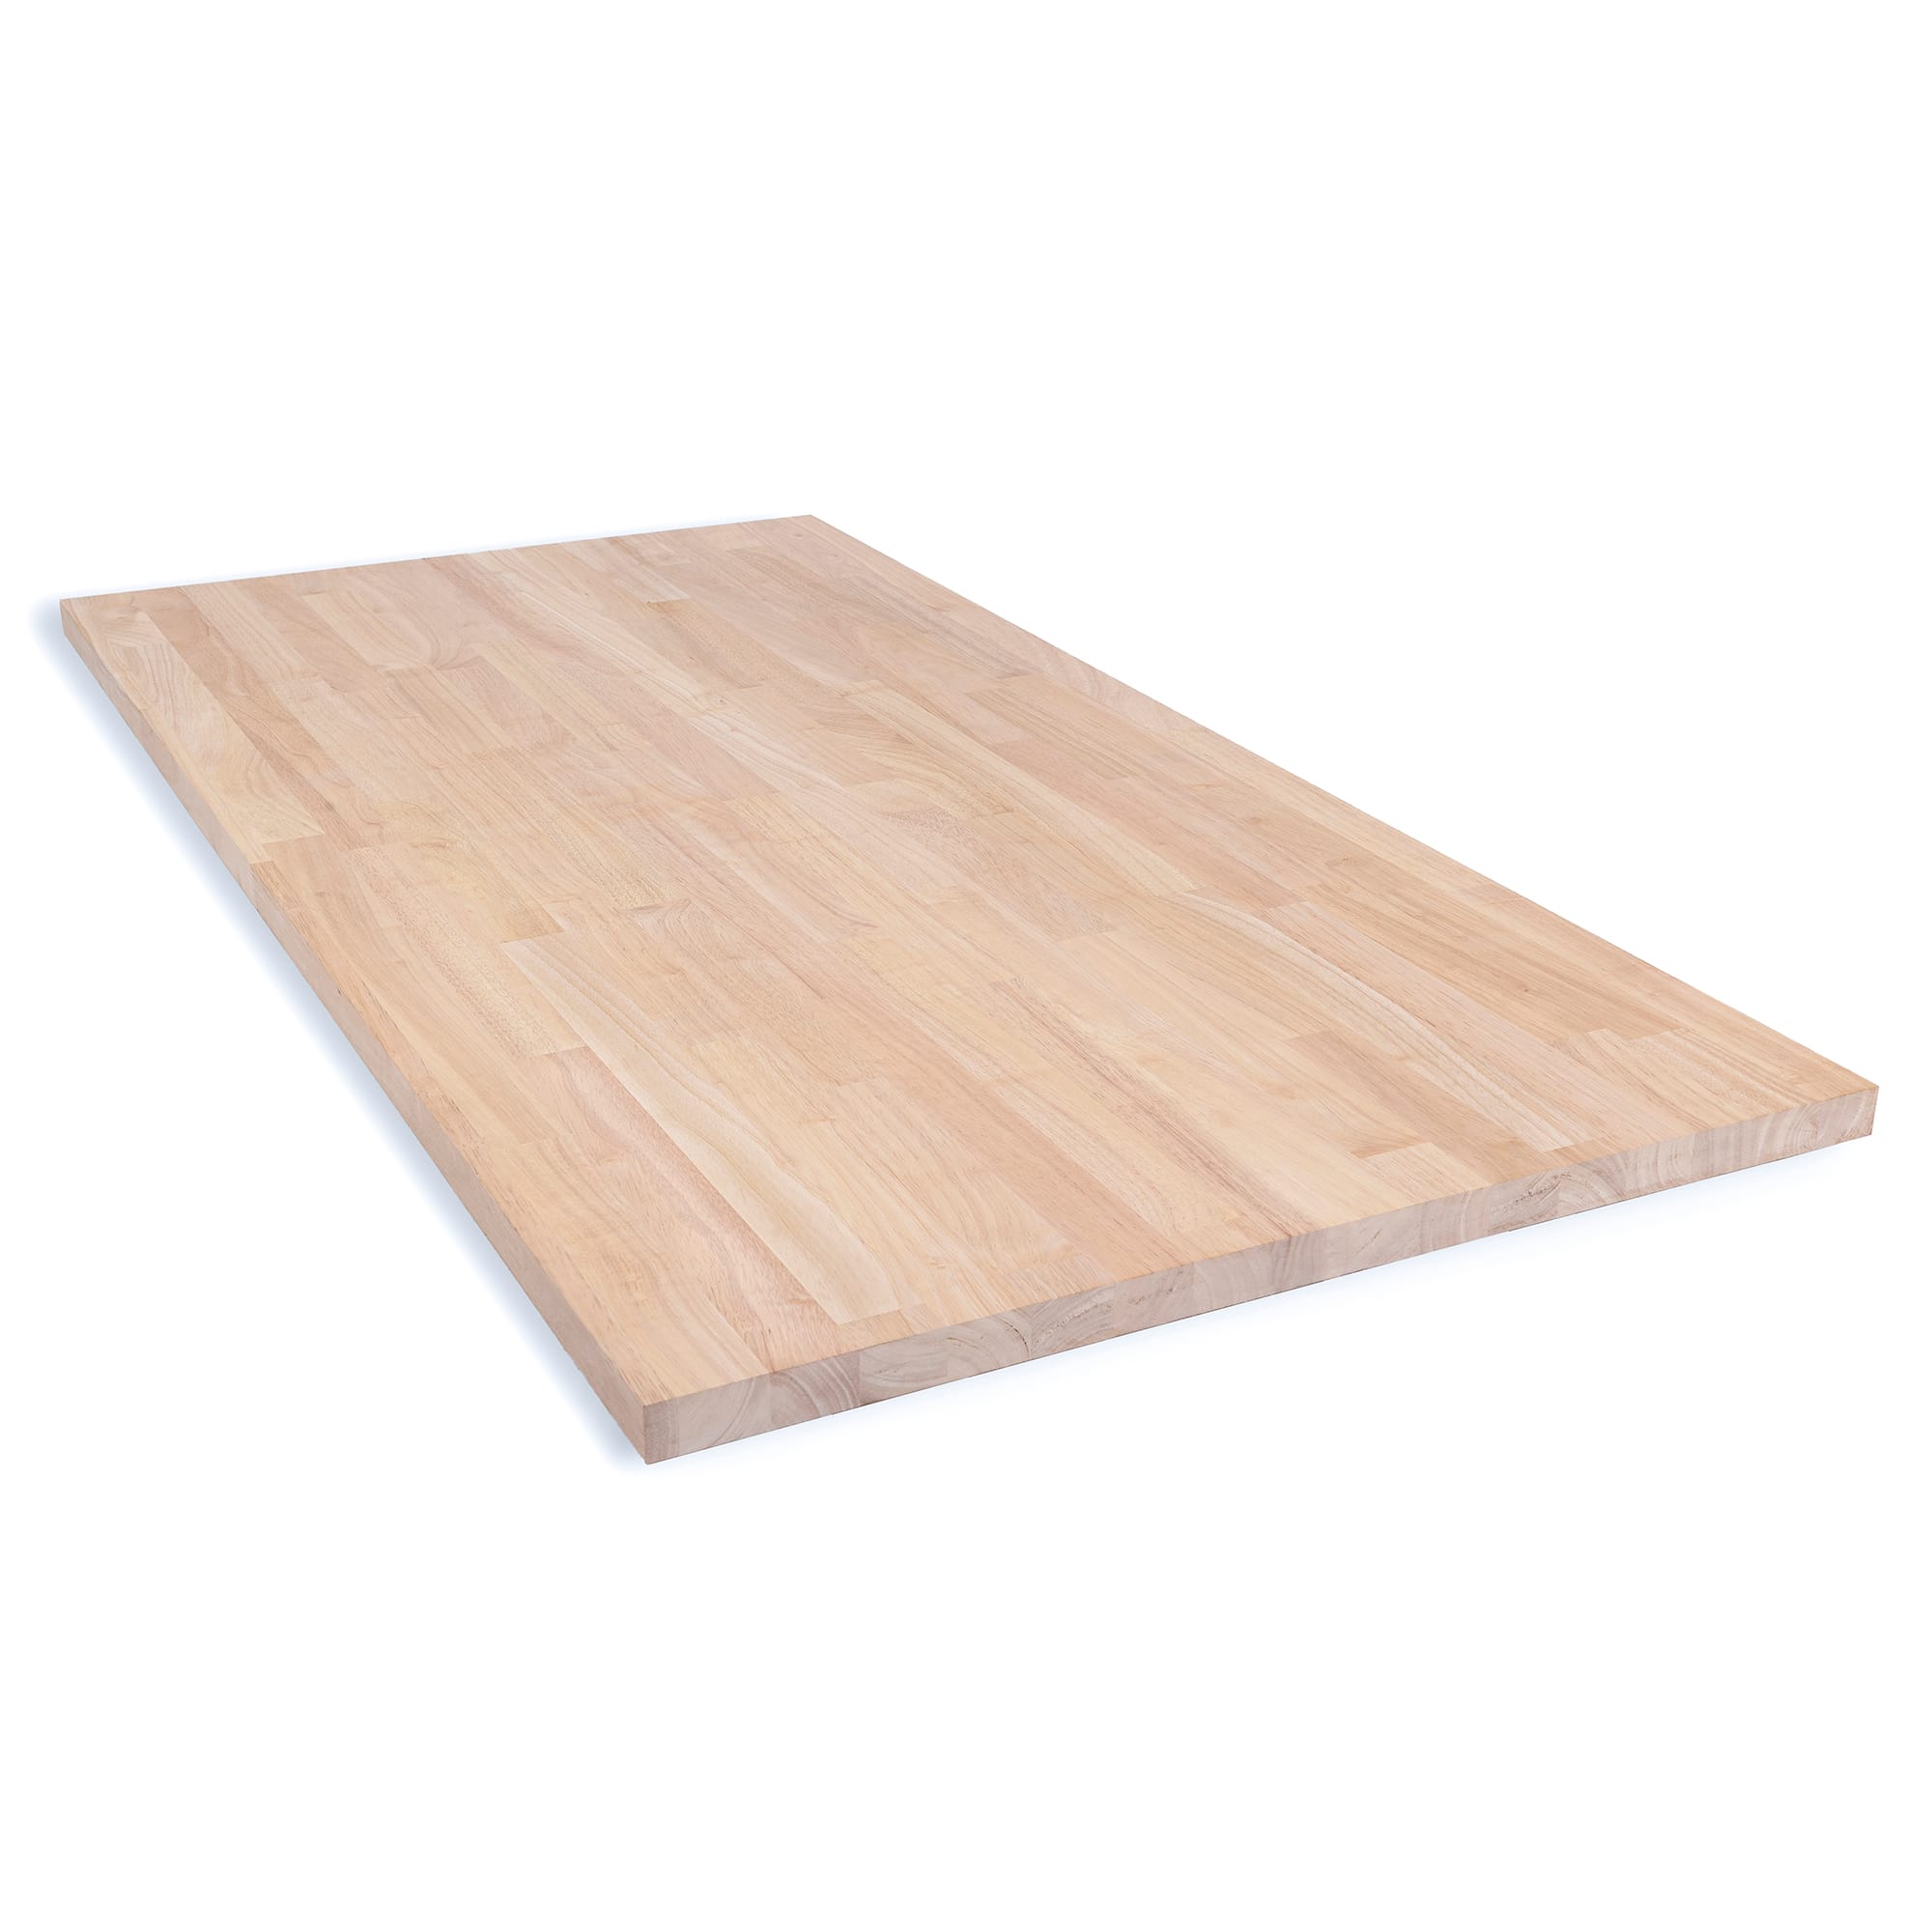 Unfinished Hevea 60 in. Length x 30 in. Wide x 1-1/4 in Thick Butcher Block Desktop